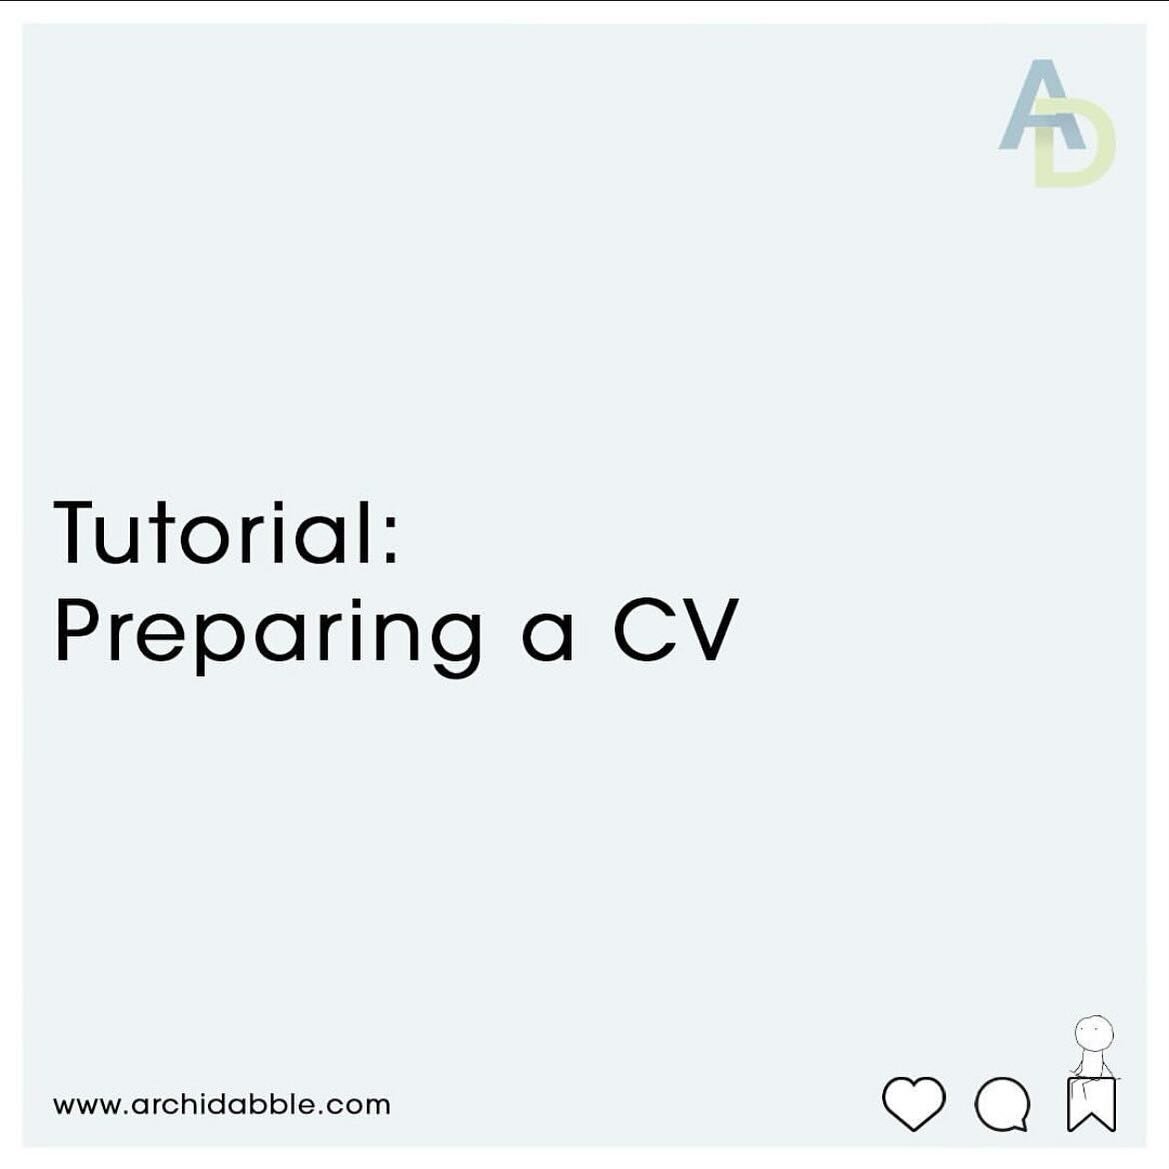 Alongside portfolios and cover letters, regardless of the profession, CVs are also sent out to companies for job applications. Specifically for us architecture job hunters, the CV is where the HR team will get an understanding about who you are as a 